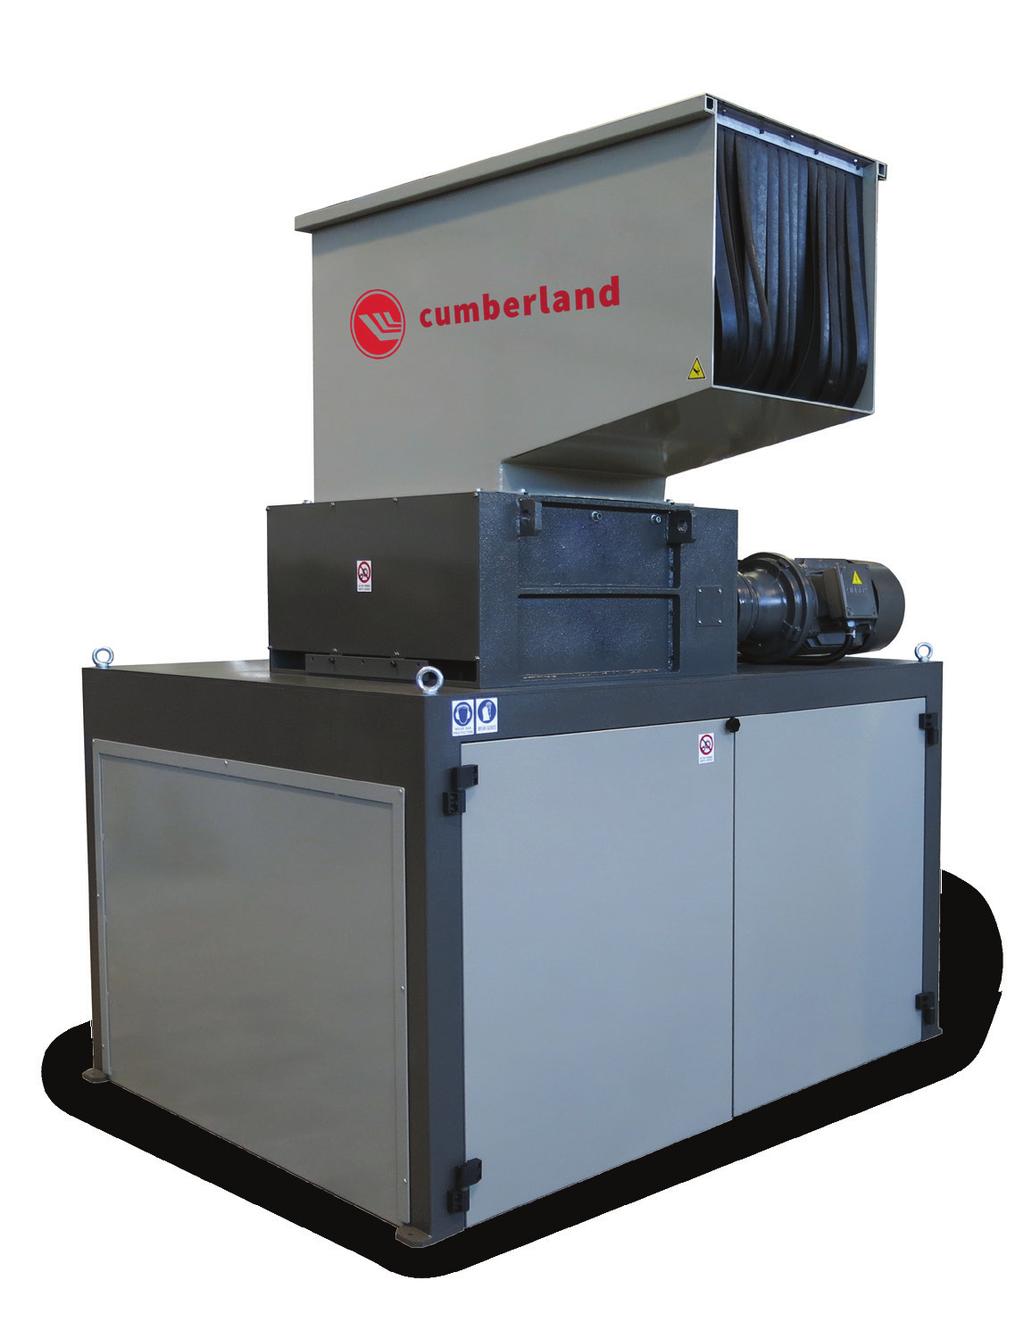 Single-Shaft Shredder Cumberland offers shredders in both singlestage and dual-stage configurations,